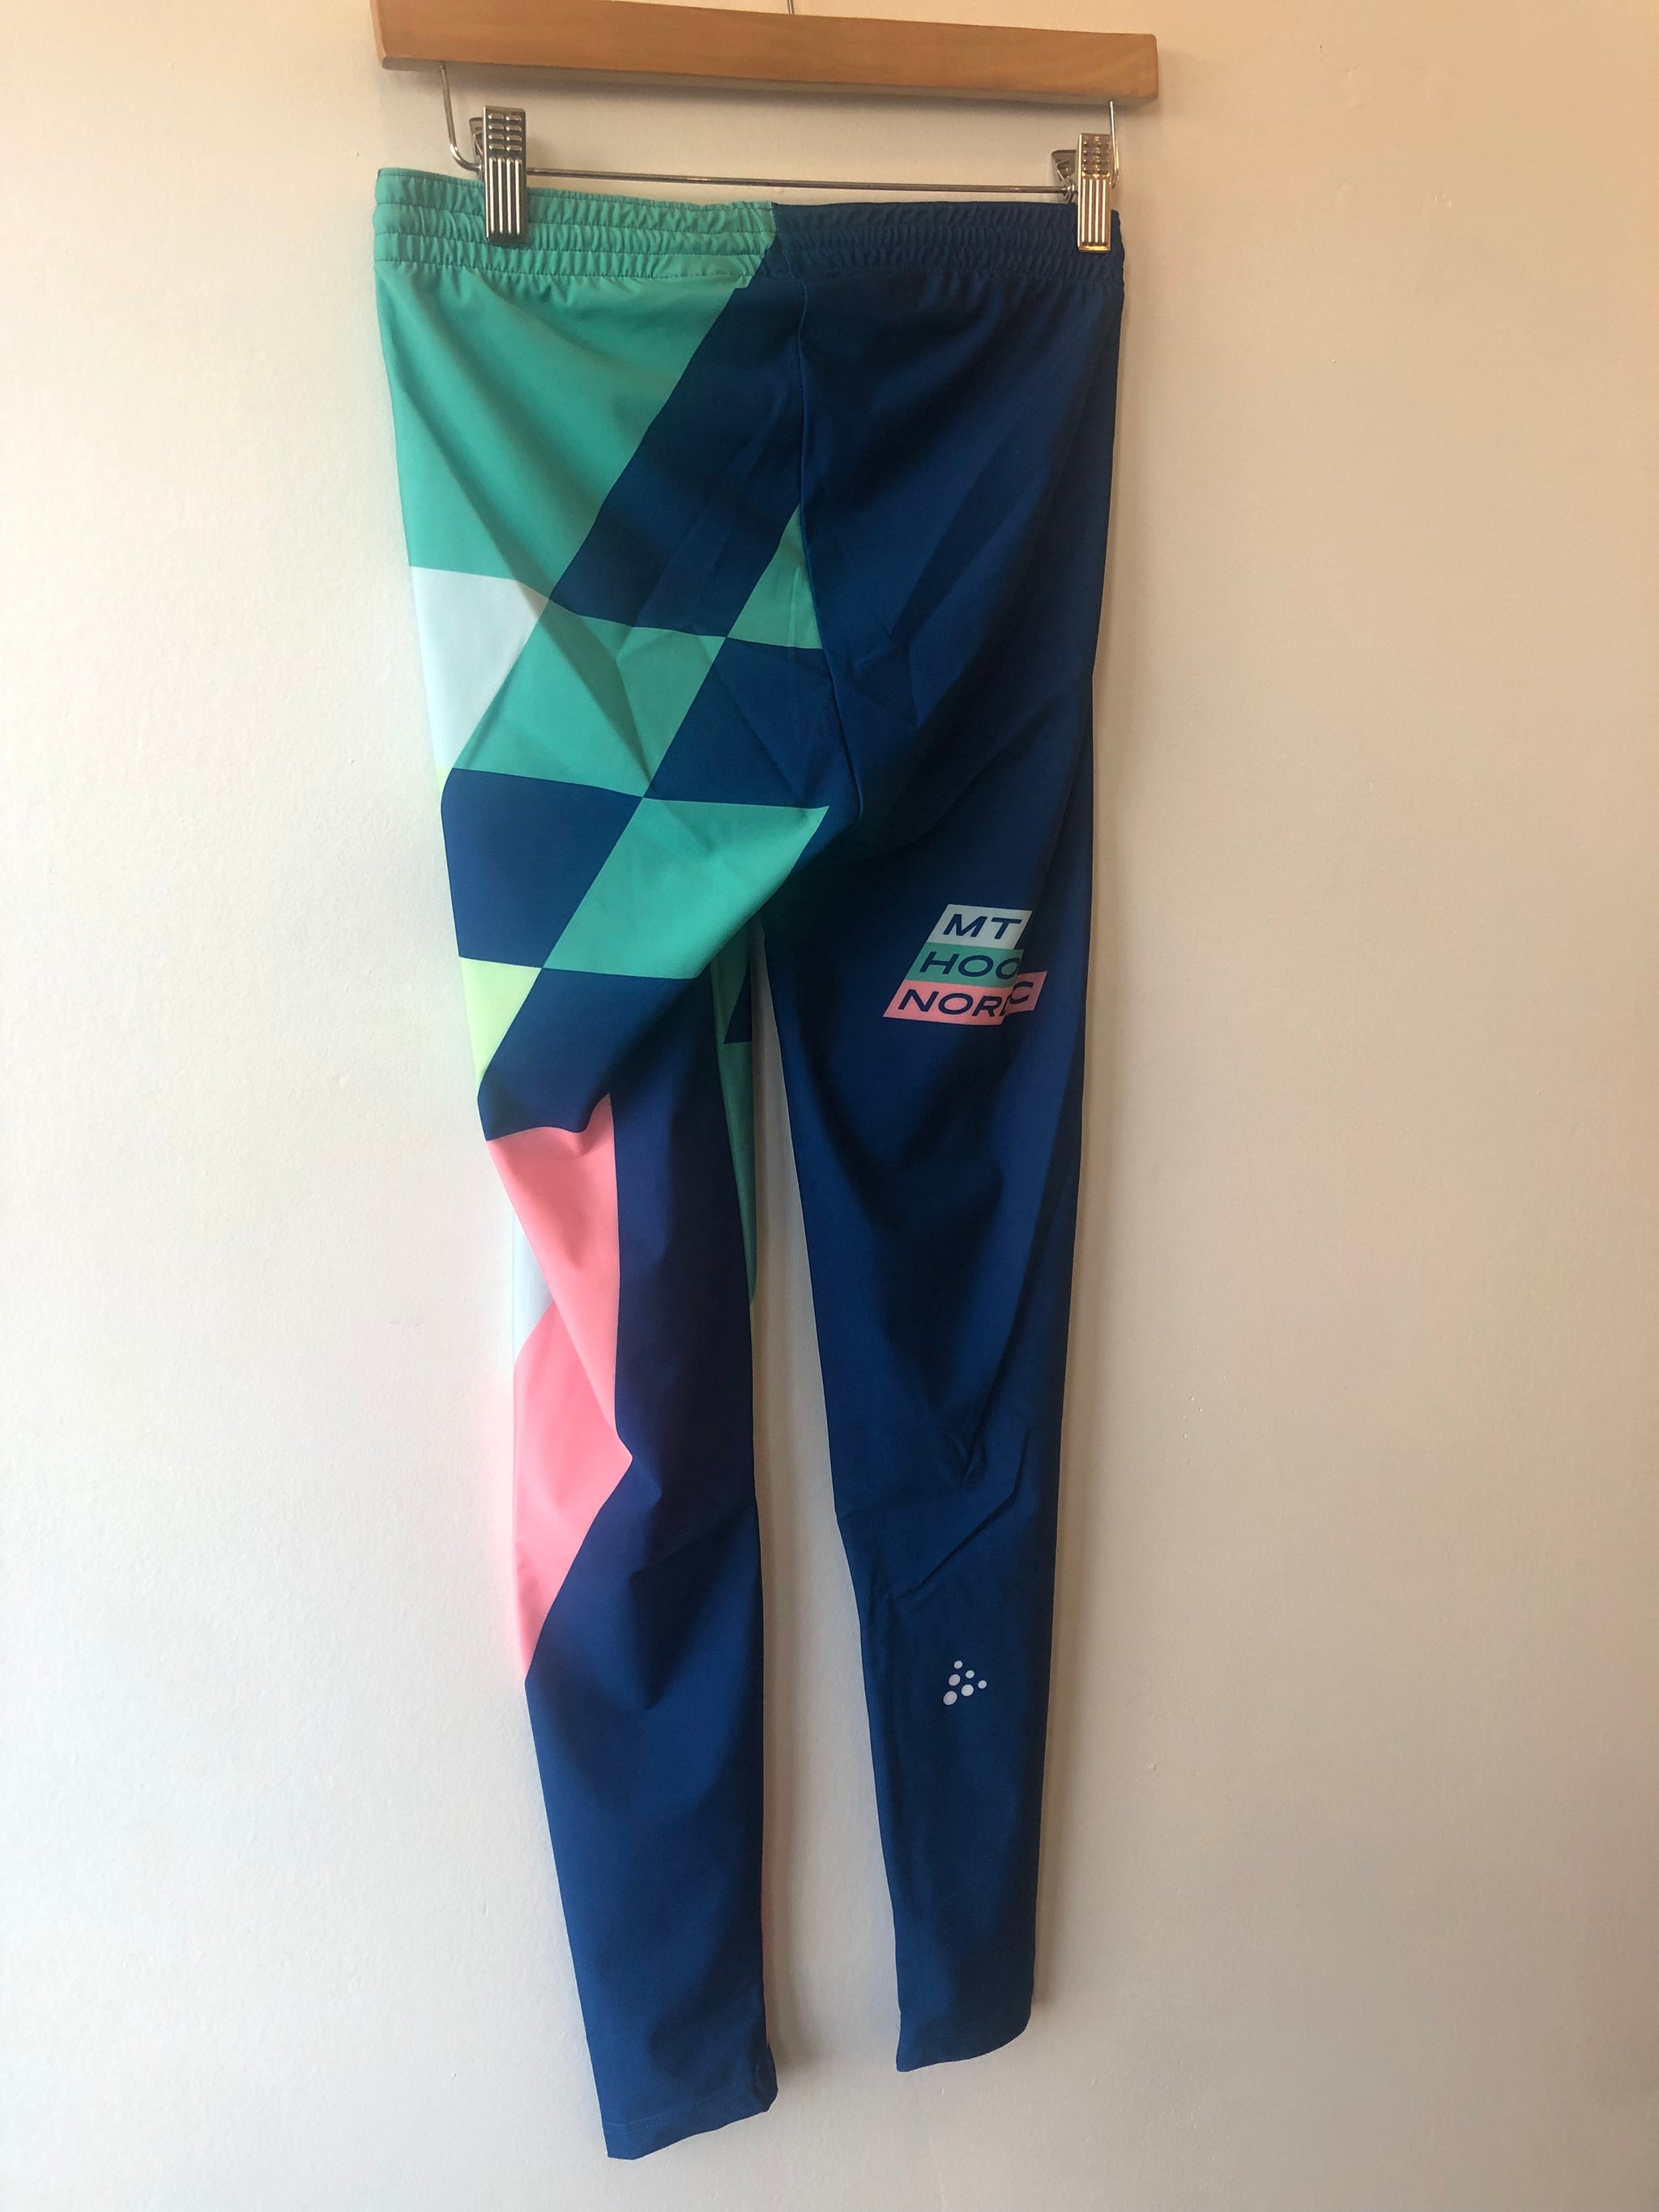 Teacup Nordic Race Suits (jersey and/or tights) - Teacup Lake